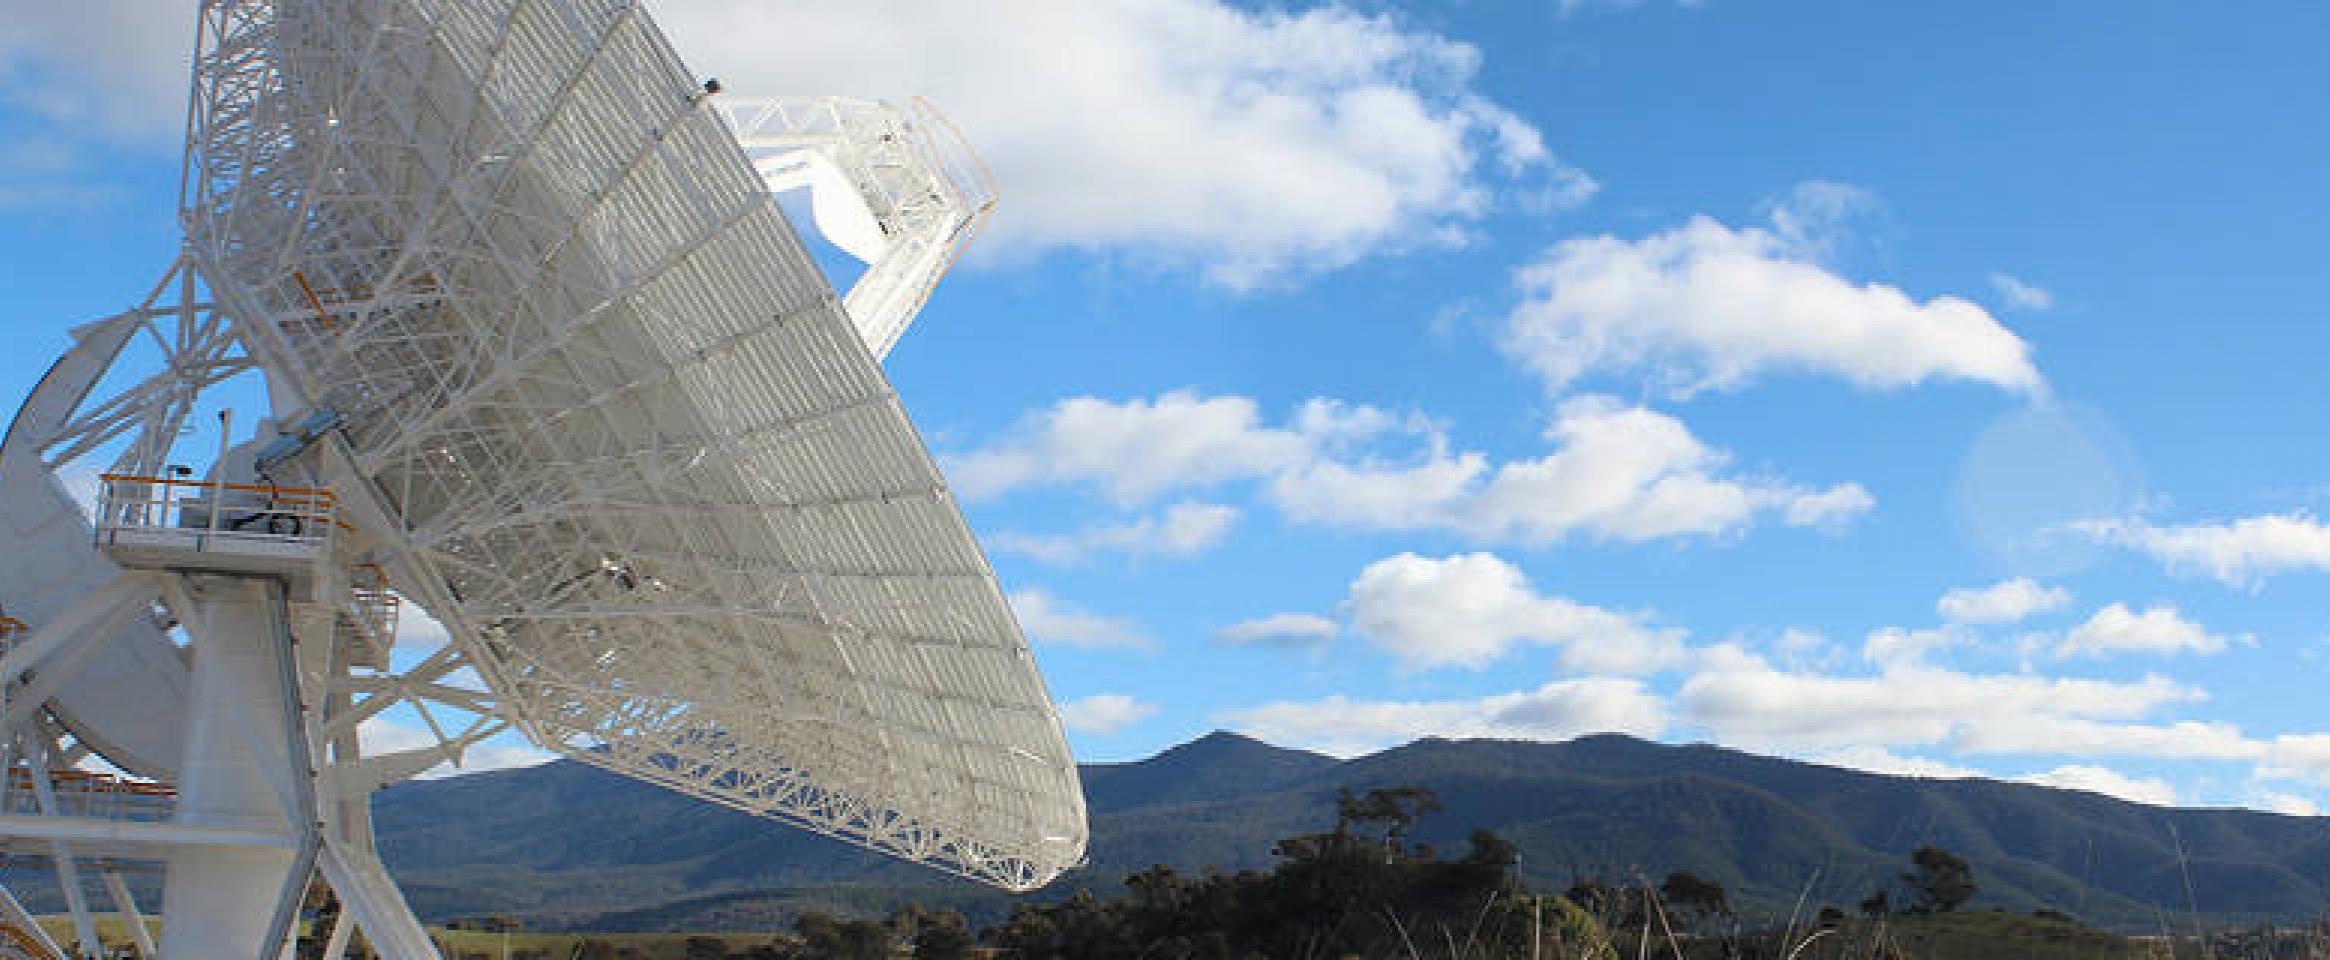 Photo of Deep Space Station 36, a gigantic antenna dish situated against rolling Australian hills and clear sky with clouds.